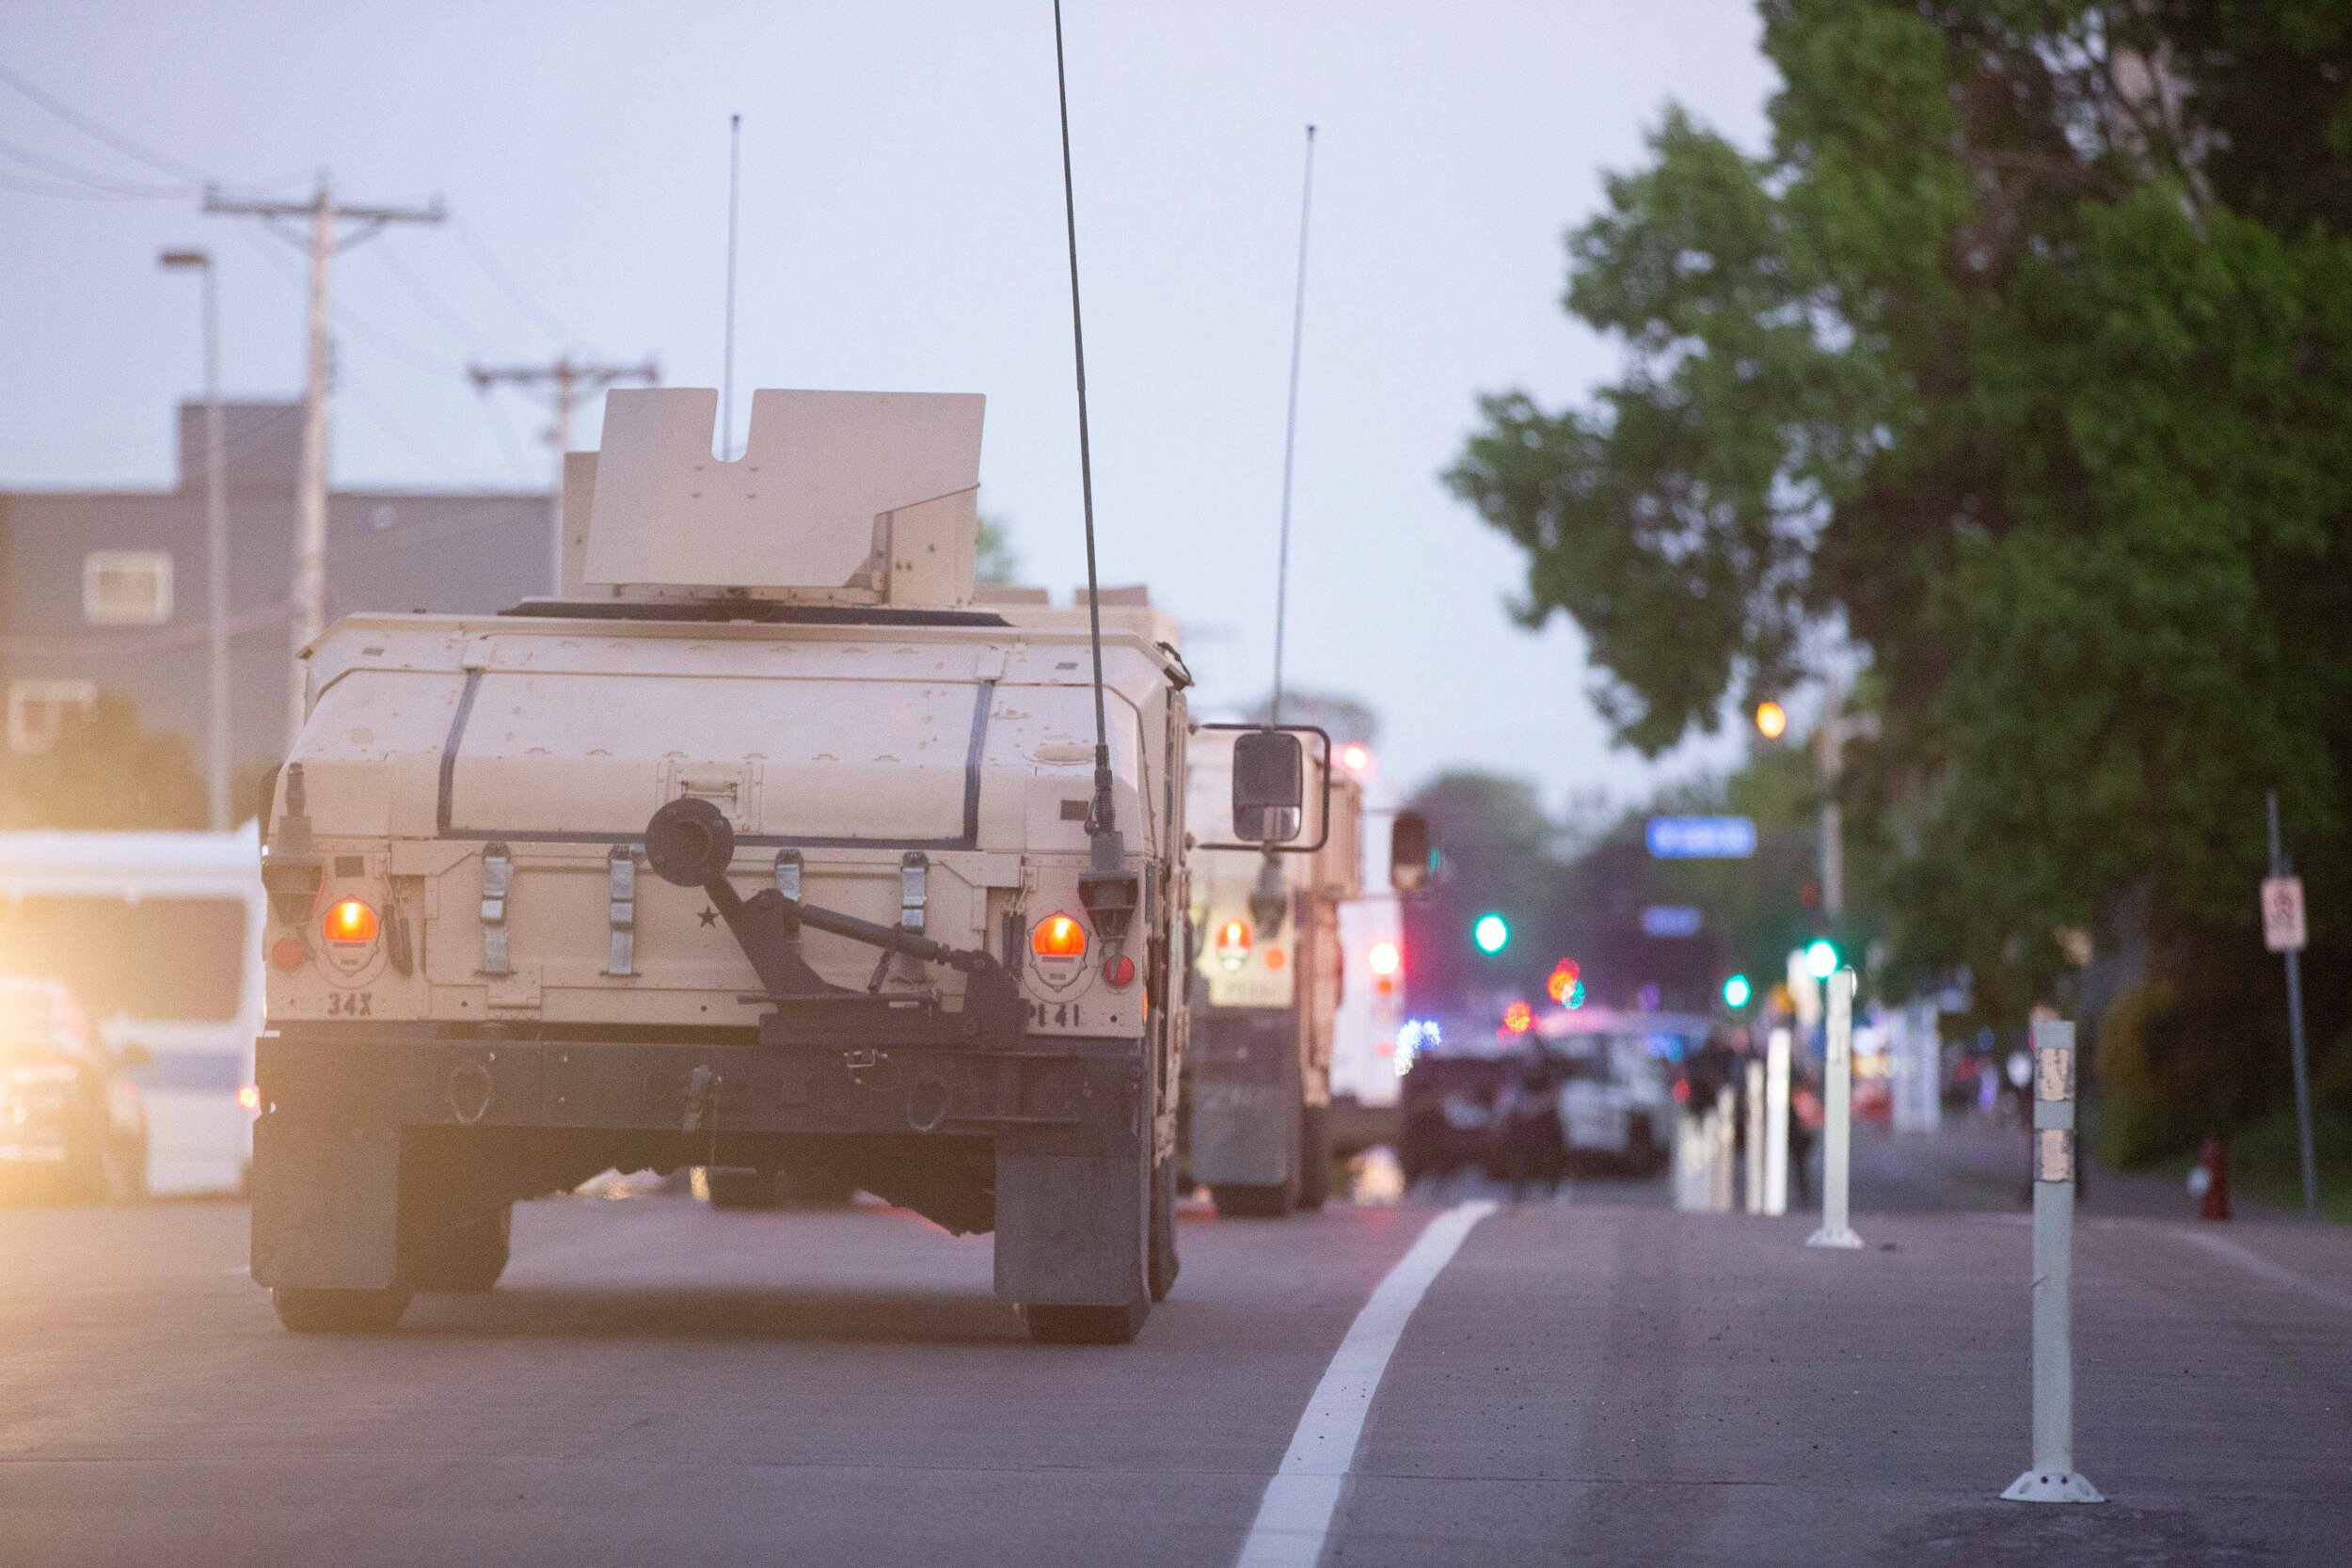  A caravan of humvees and military vehicles speed down a street in Minneapolis where it was headed to help arrest protesters in Minneapolis, Minnesota on May 30, 2020. Chris Juhn/Zuma. 